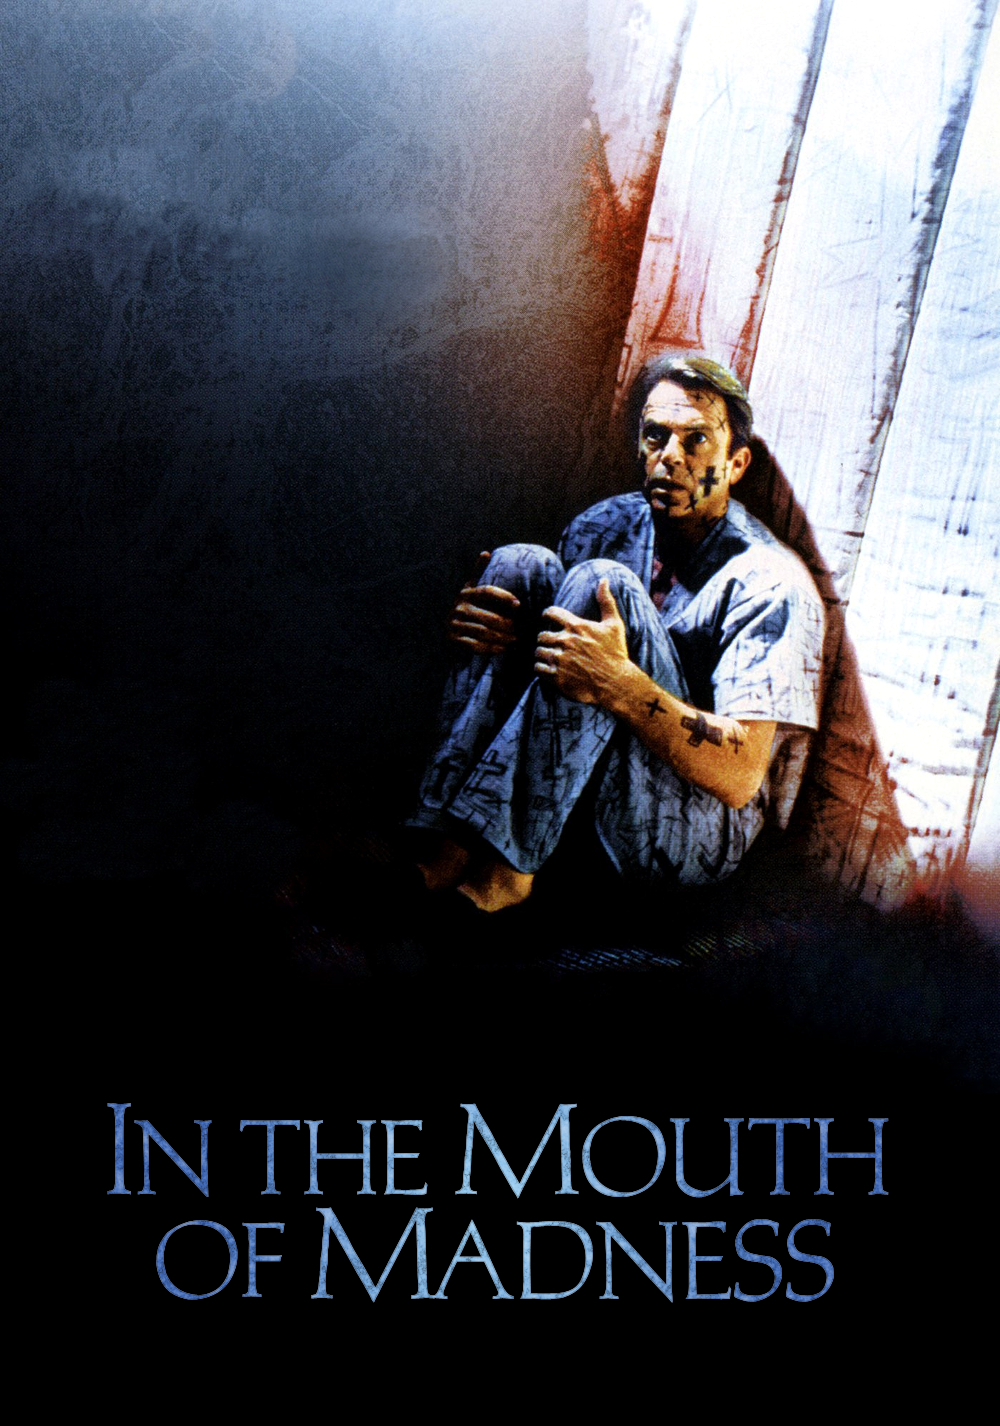 IN THE MOUTH OF MADNESS Movie Poster 